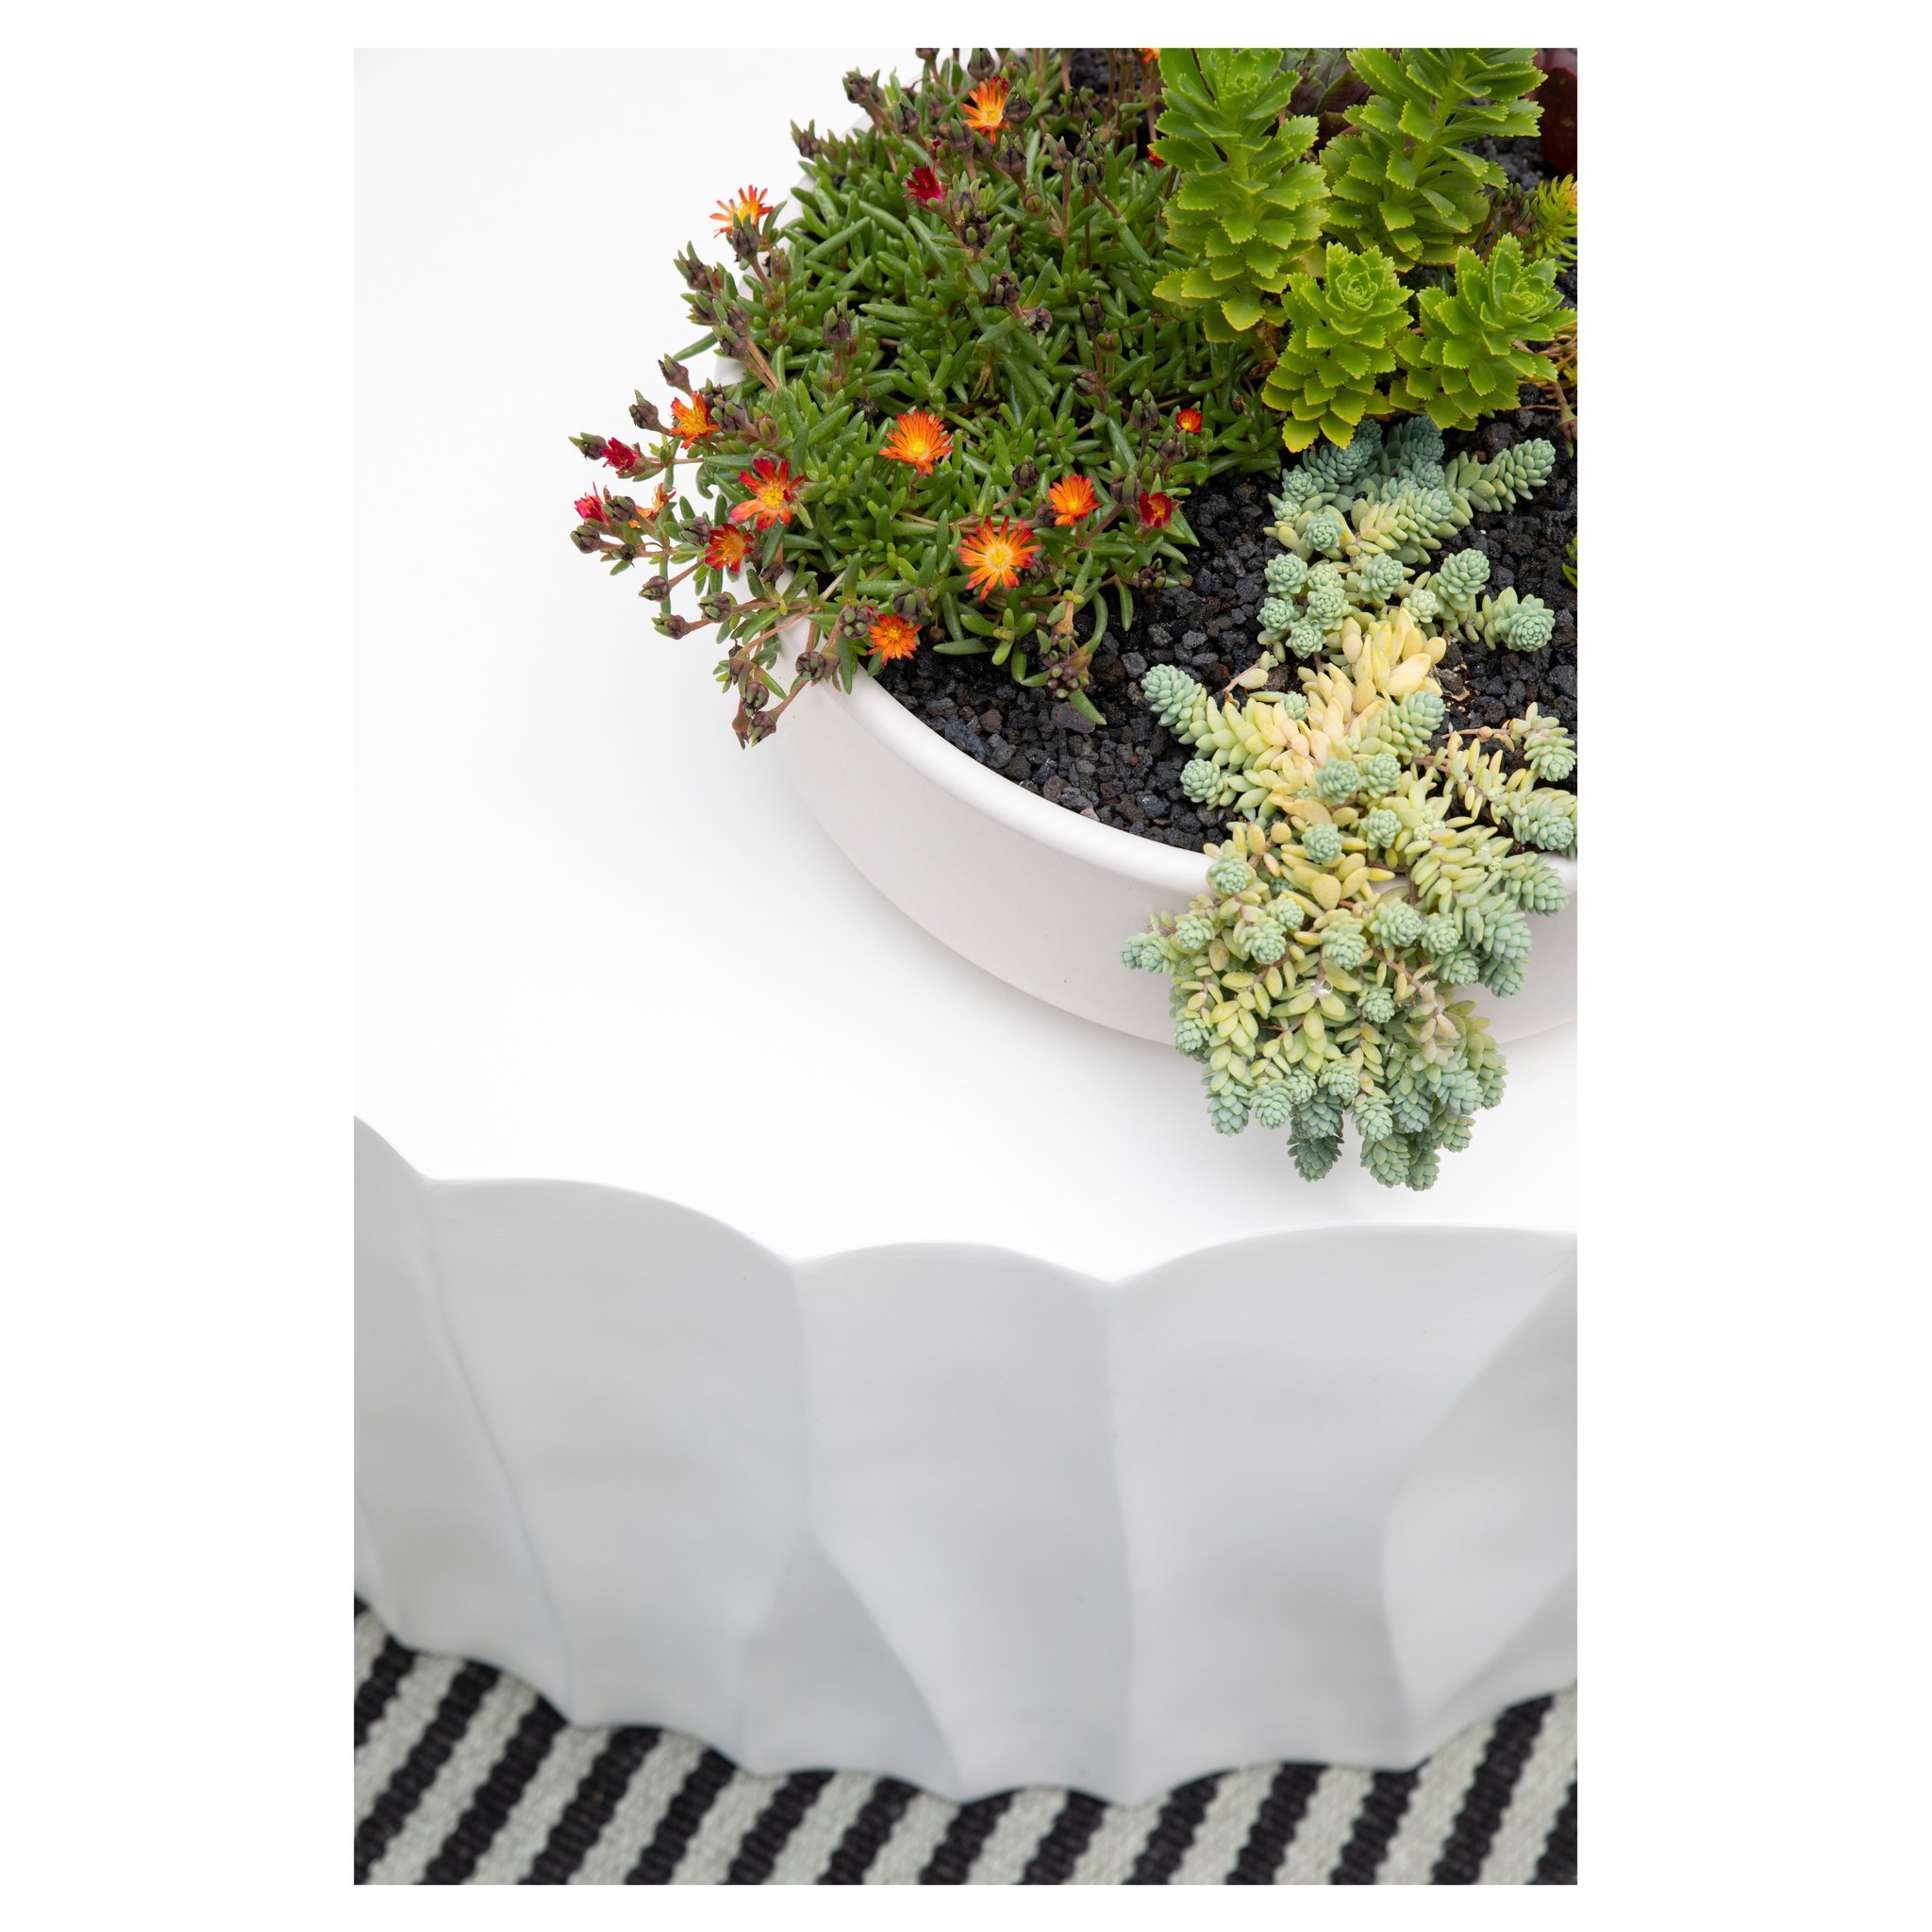 I hope your weekend doesn't succ 🌱

Who is refreshing their planters for springtime vibrance? My favorite arrangements include height for the back of the planters, filler flowers that add color to the surface area, and then a beautiful drape of bota